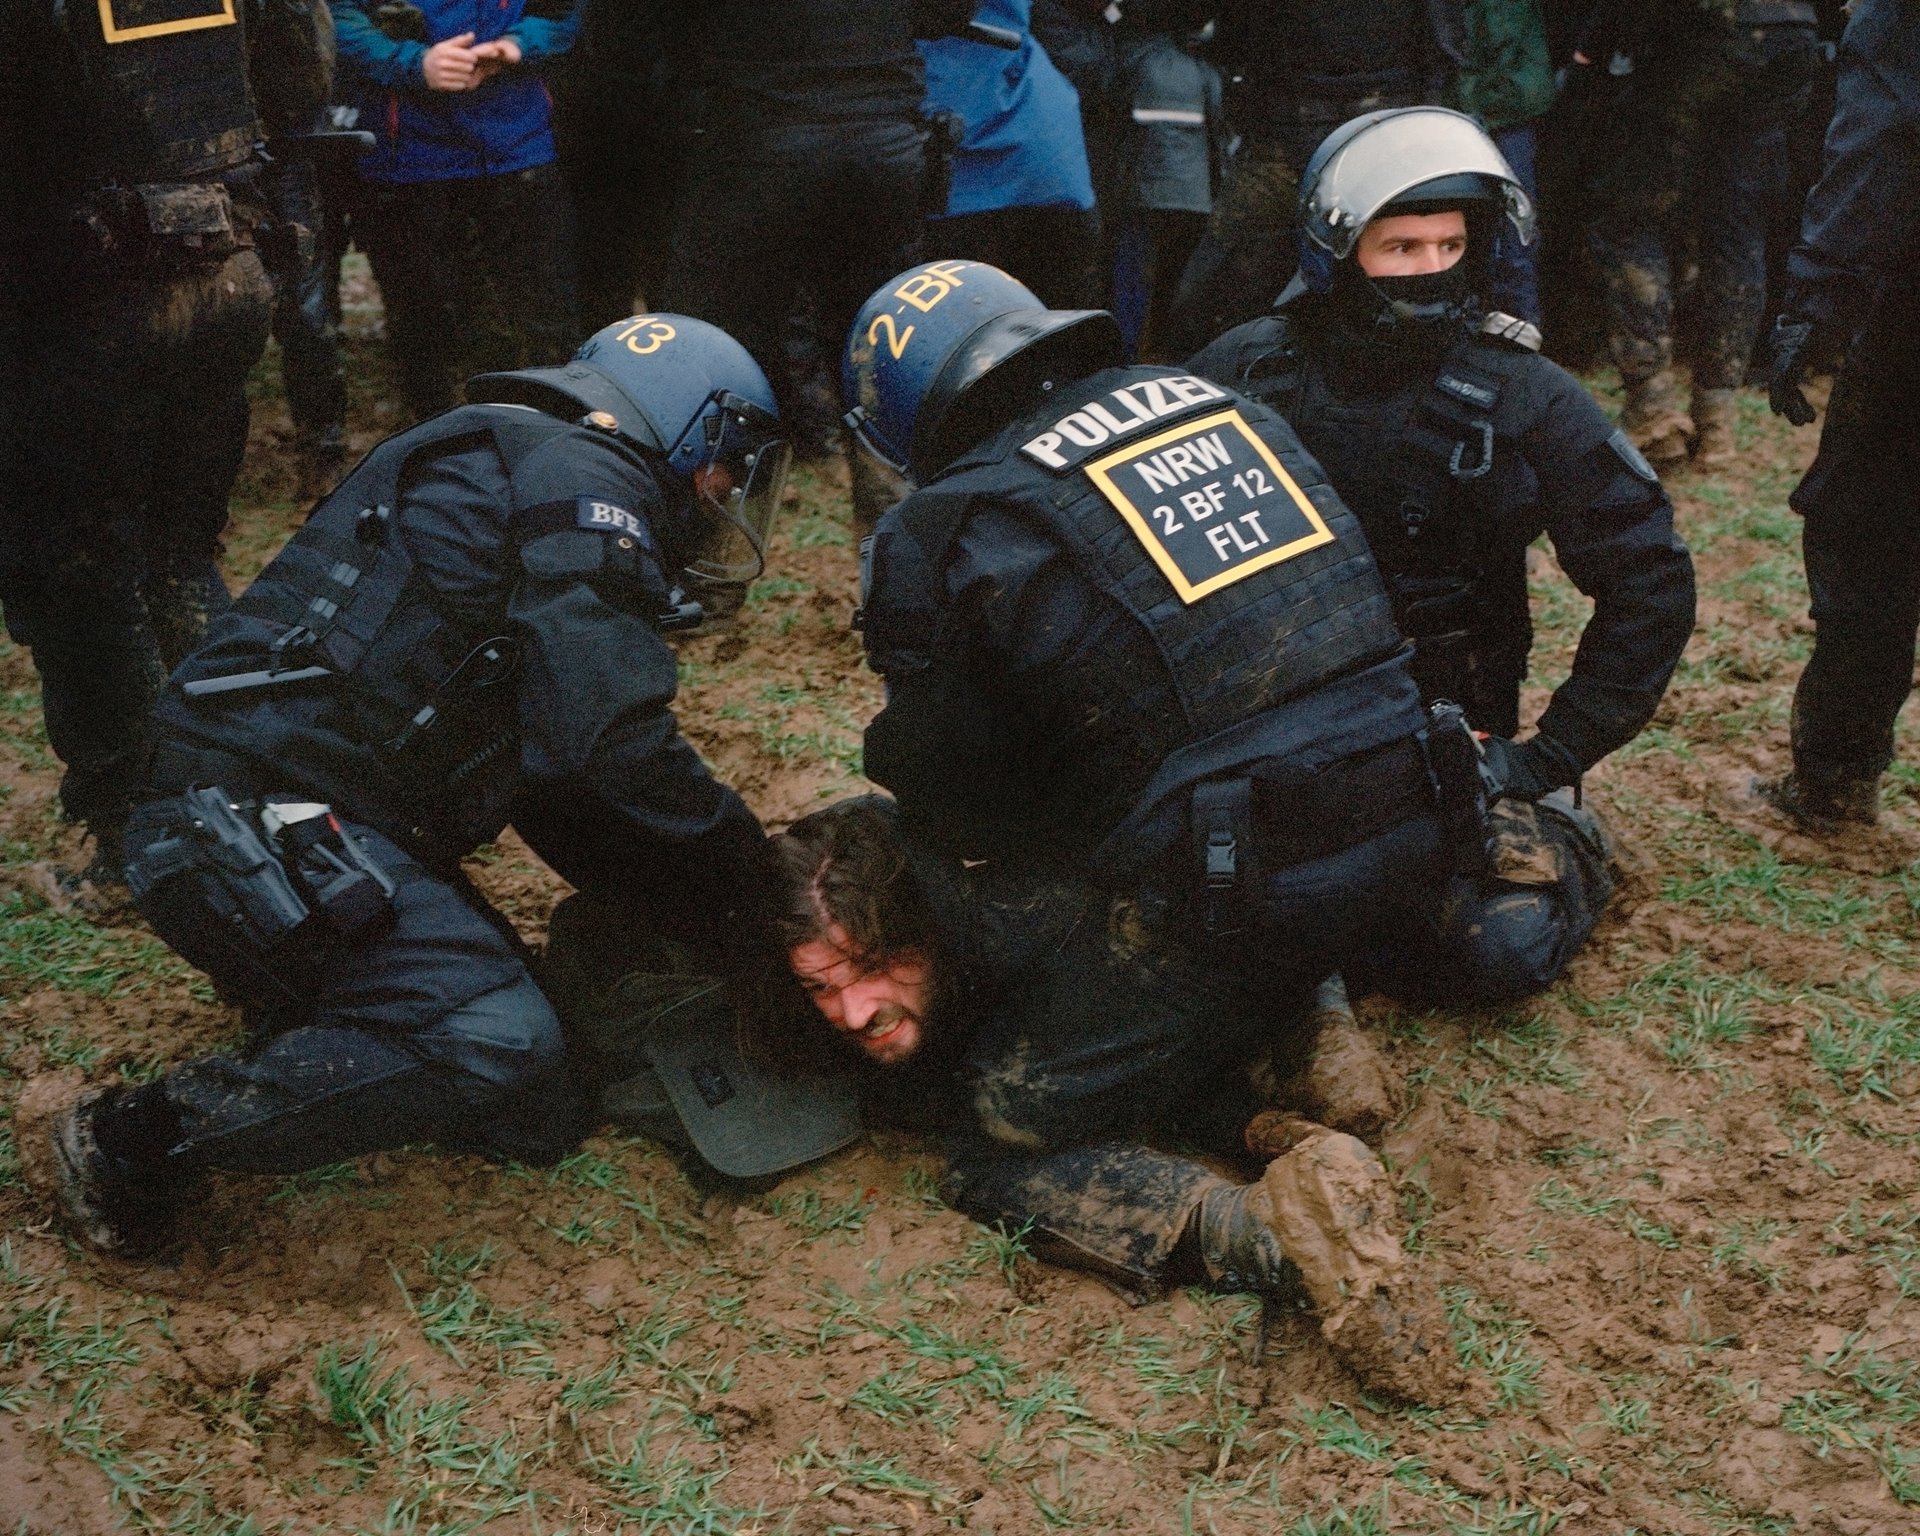 Police officers hold a demonstrator who tried to march towards the village of Lützerath, Germany, to the ground.